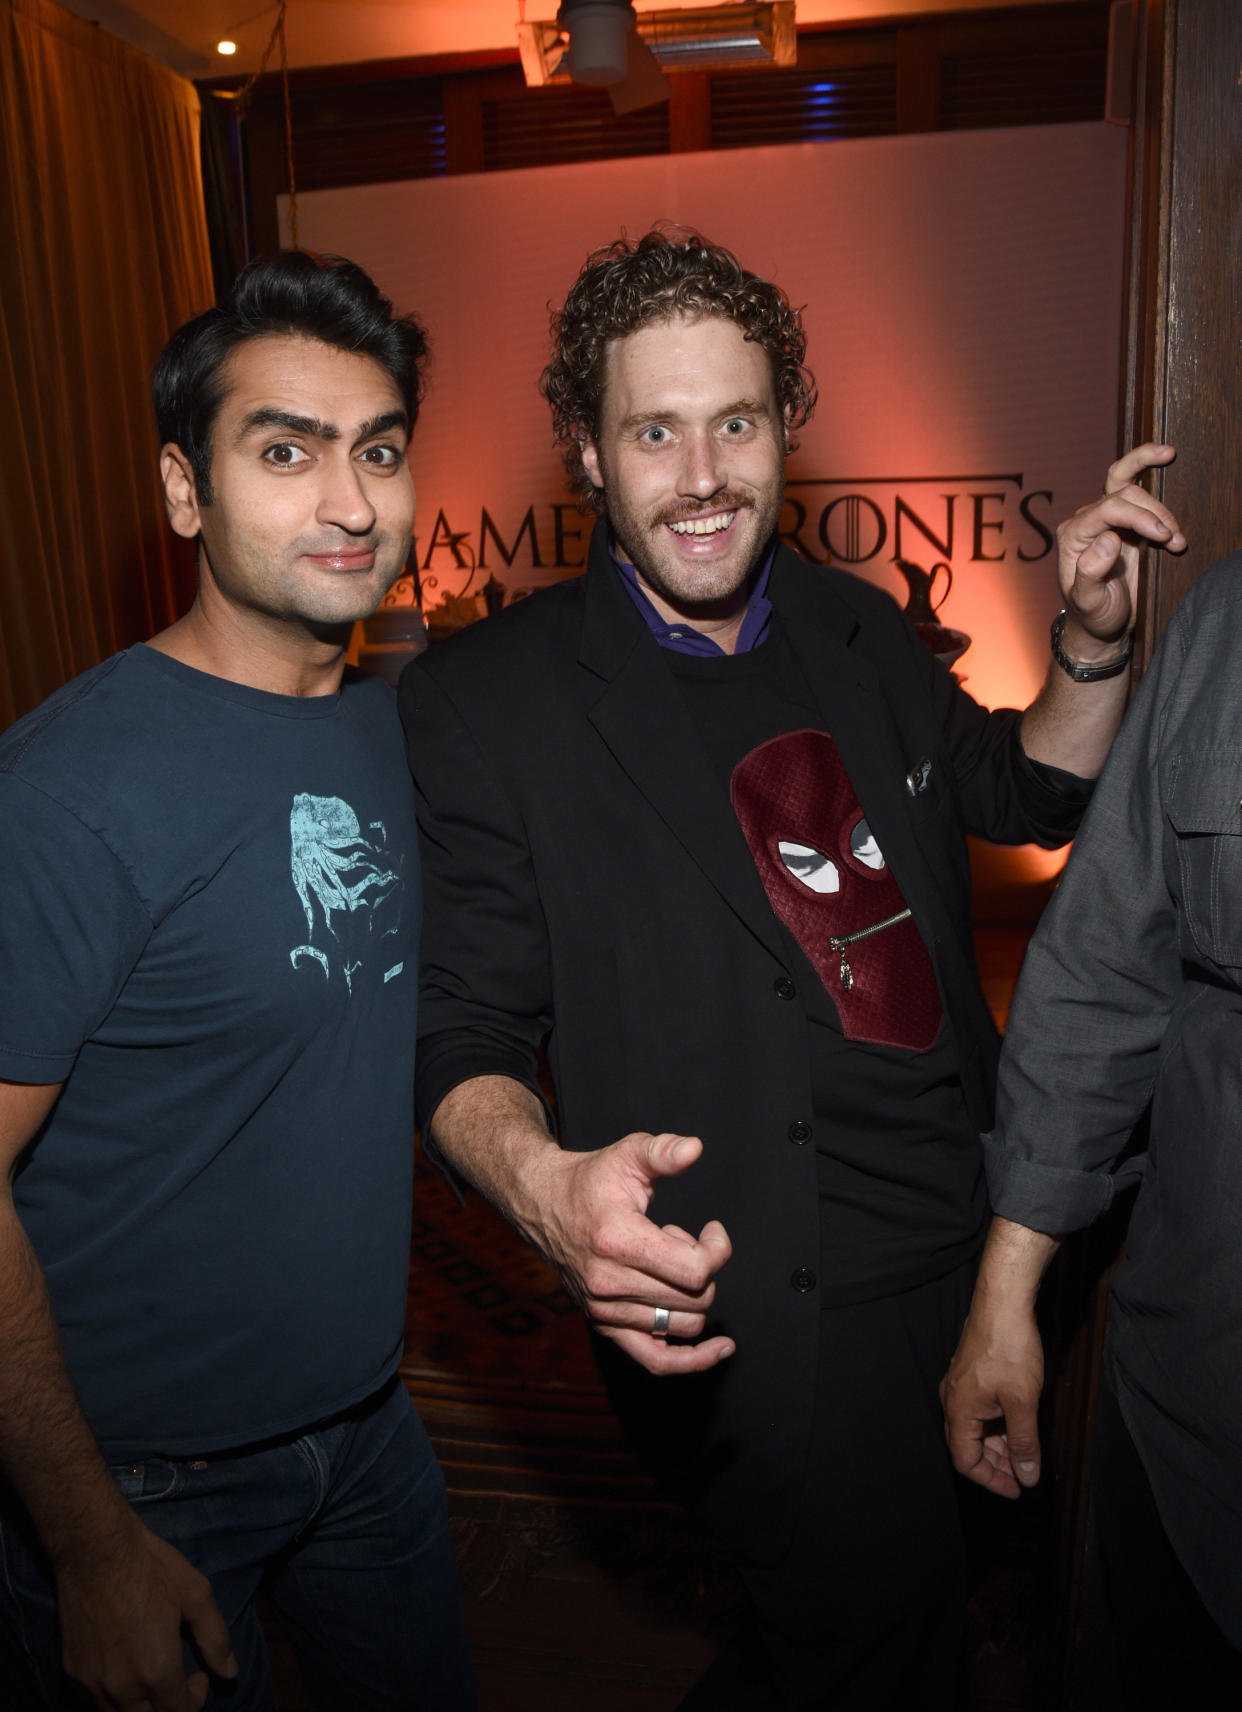 SAN DIEGO, CA - JULY 11:  Actors Kumail Nanjiani (L) and T.J. Miller attend Entertainment Weekly's Comic-Con 2015 Party sponsored by HBO, Honda, Bud Light Lime and Bud Light Ritas at FLOAT at The Hard Rock Hotel on July 11, 2015 in San Diego, California.  (Photo by Michael Buckner/Getty Images for Entertainment Weekly)